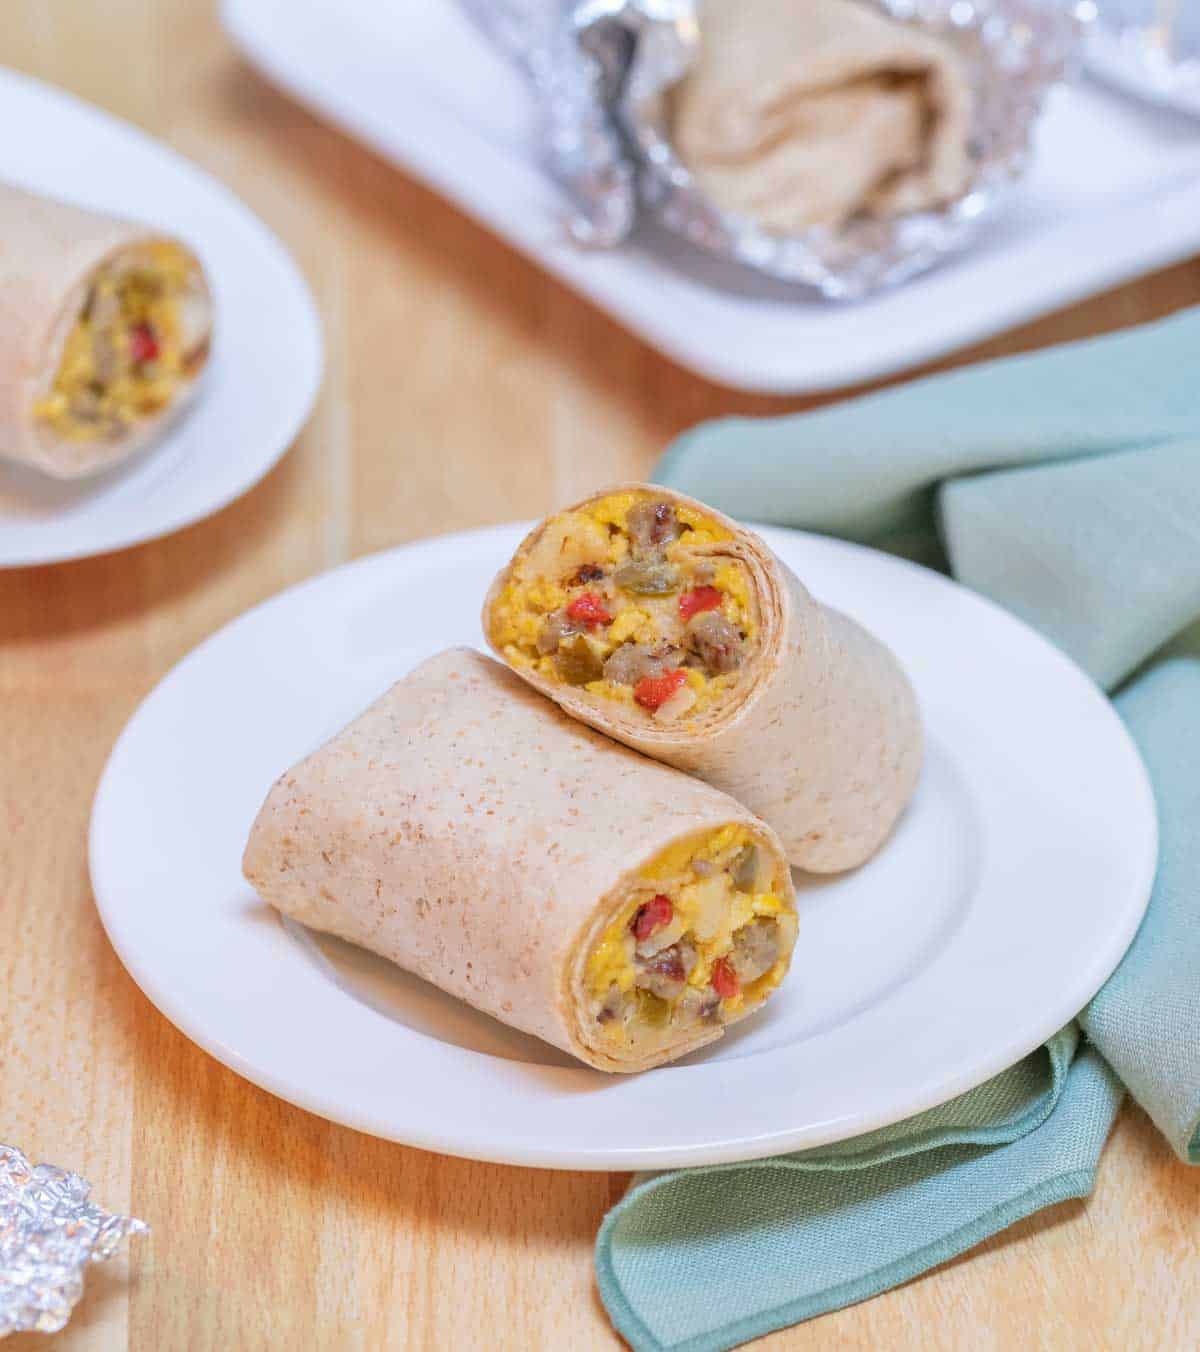 white plate holding one Breakfast Burrito, cut in half to show inside